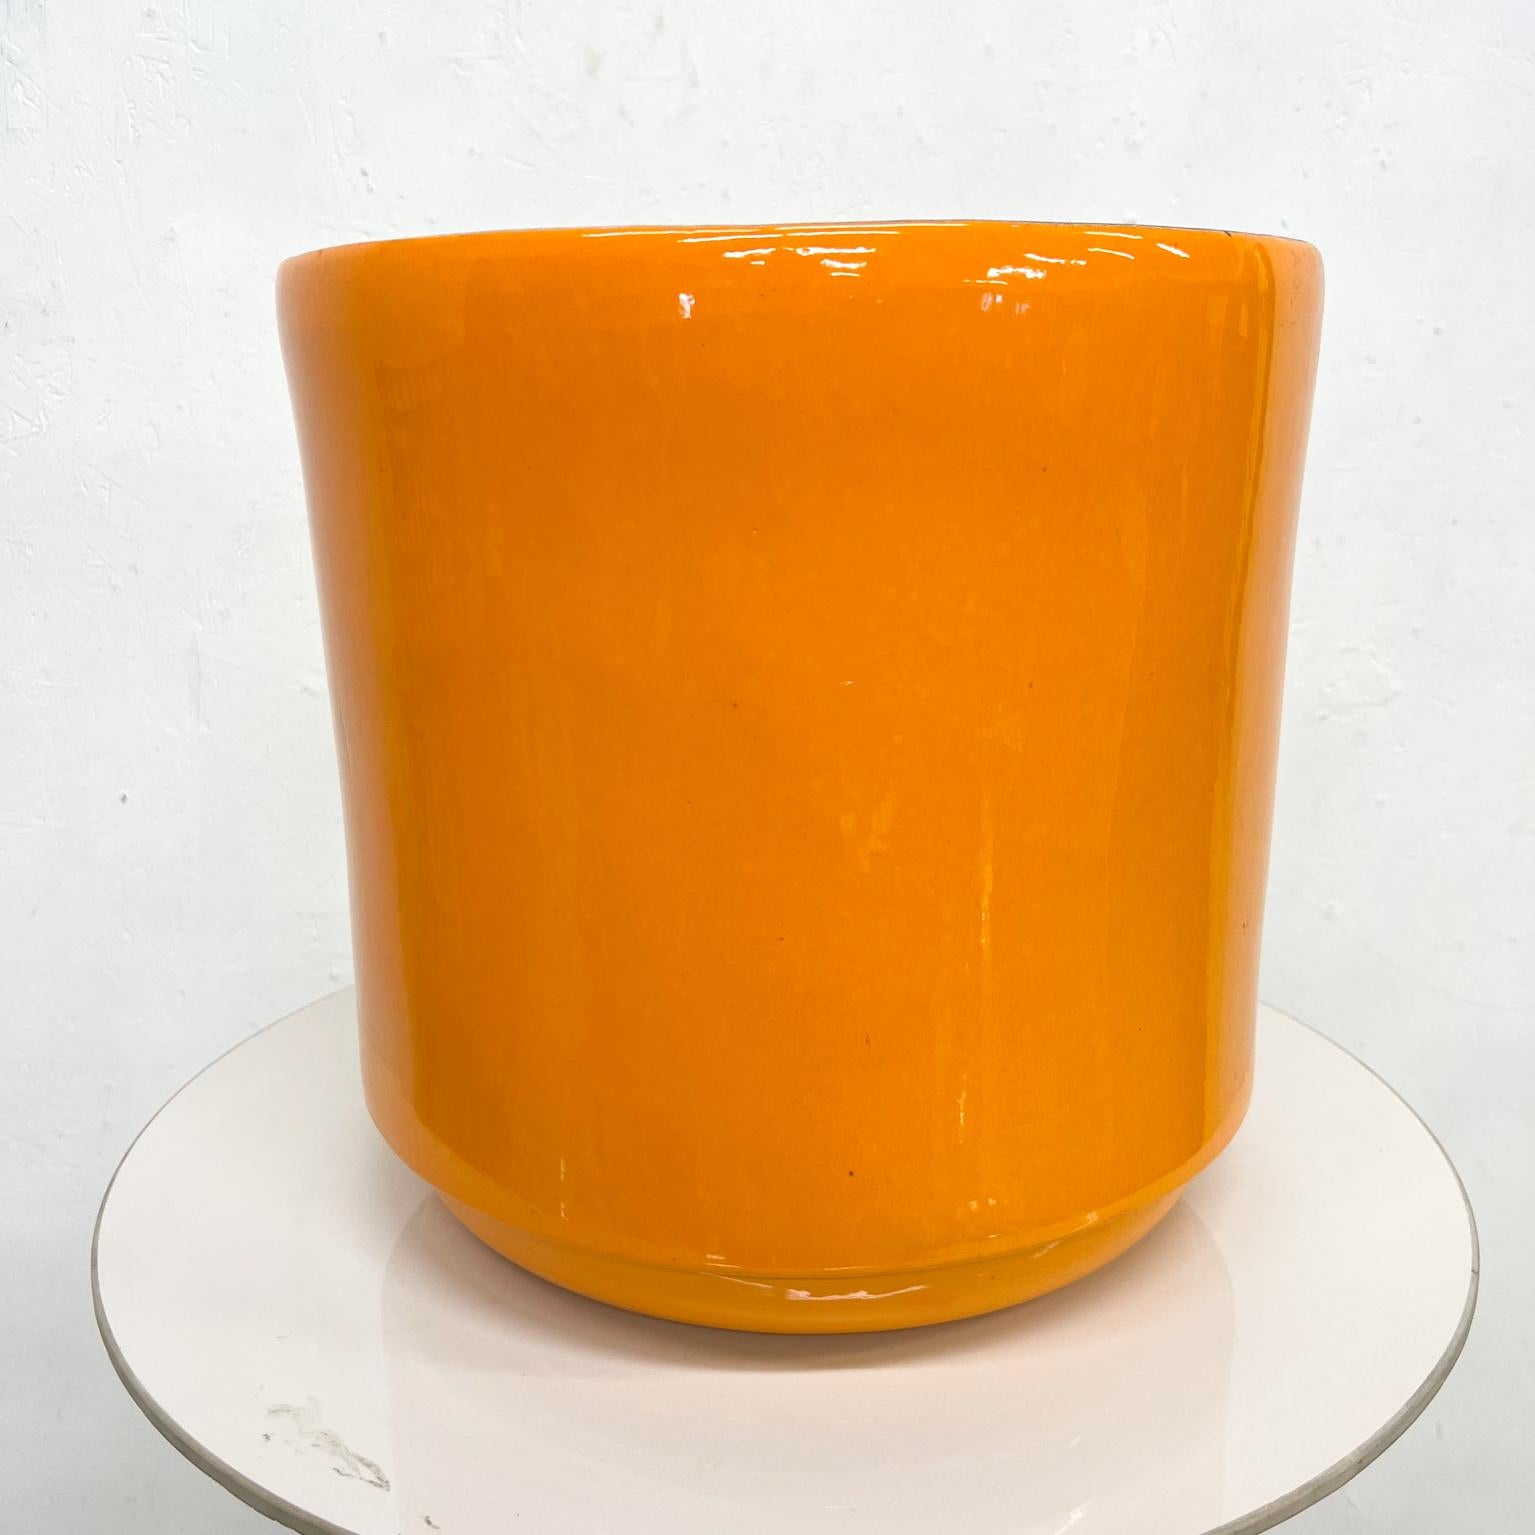 1960s Modern Gainey Style Pottery Orange Planter 
Glaze exterior black flat interior
15 tall x 15.5 diameter
Stamped at bottom.
Made in the USA.
Preowned original vintage condition. Minor nicks on finish present.
Refer to images. 
